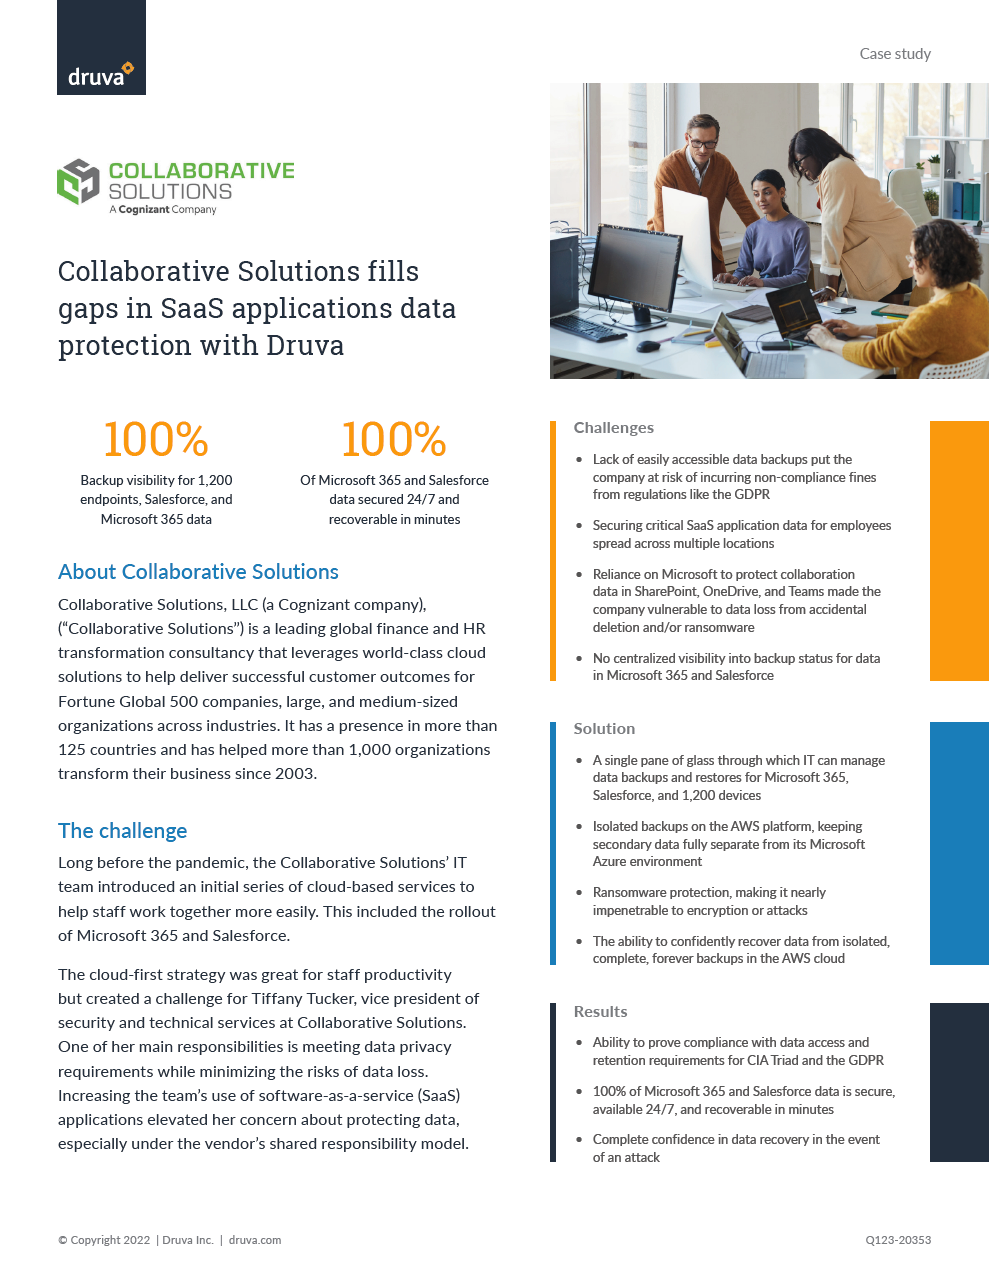 Collaborative Solutions fills gaps in SaaS applications data protection with Druva